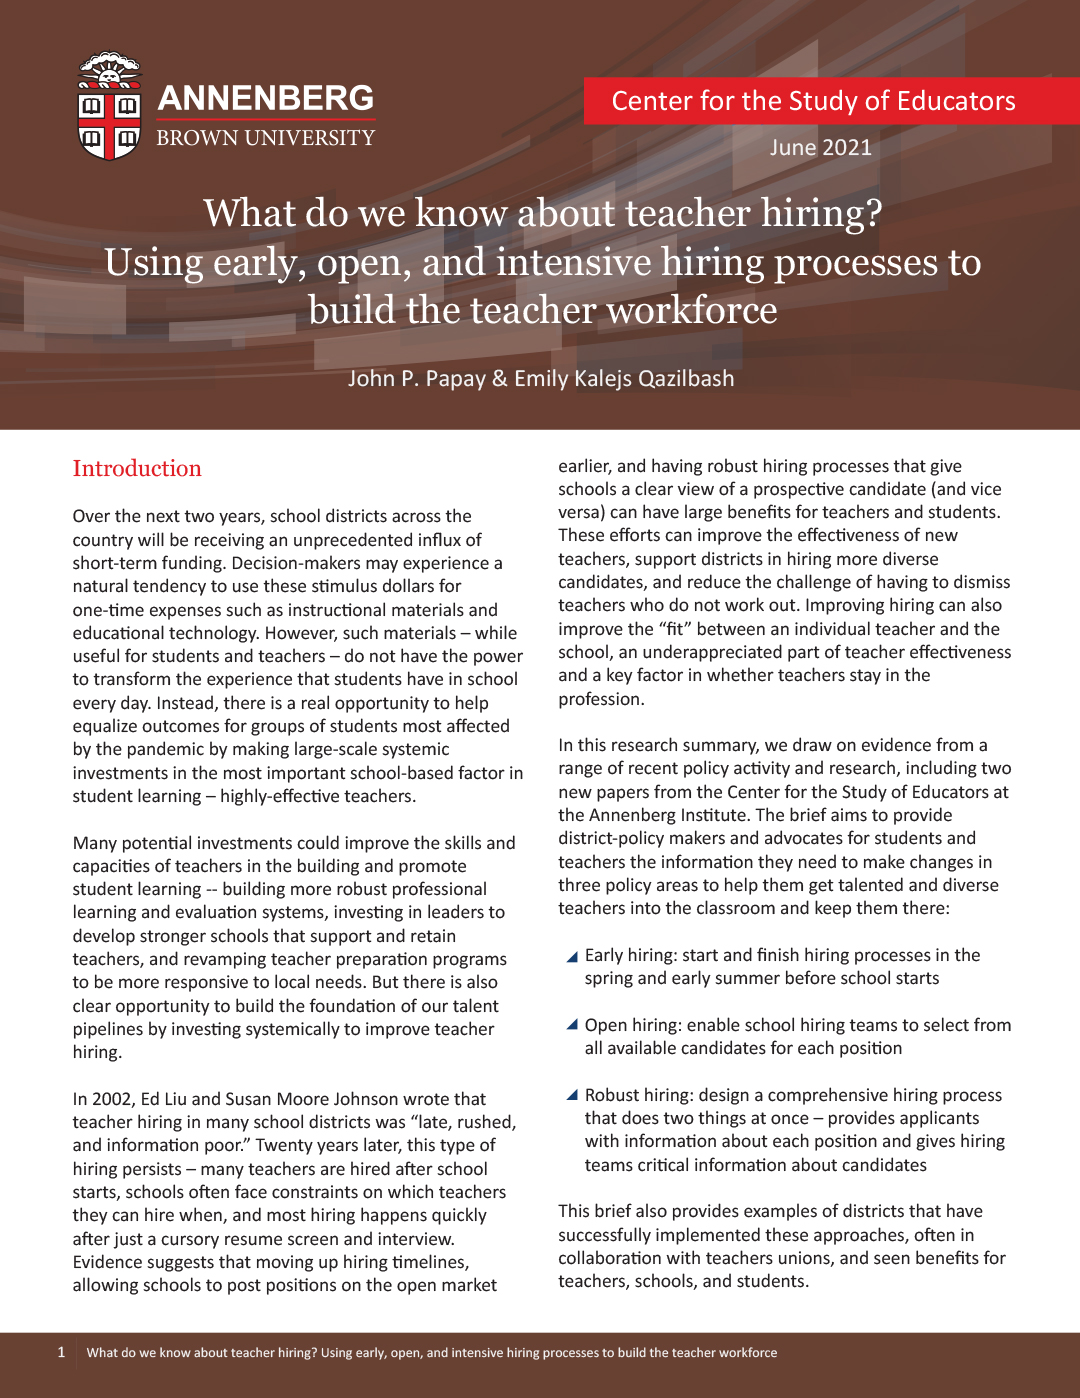 AWhat do we know about teacher hiring?Using early, open, and intensive hiring processes to build the teacher workforce